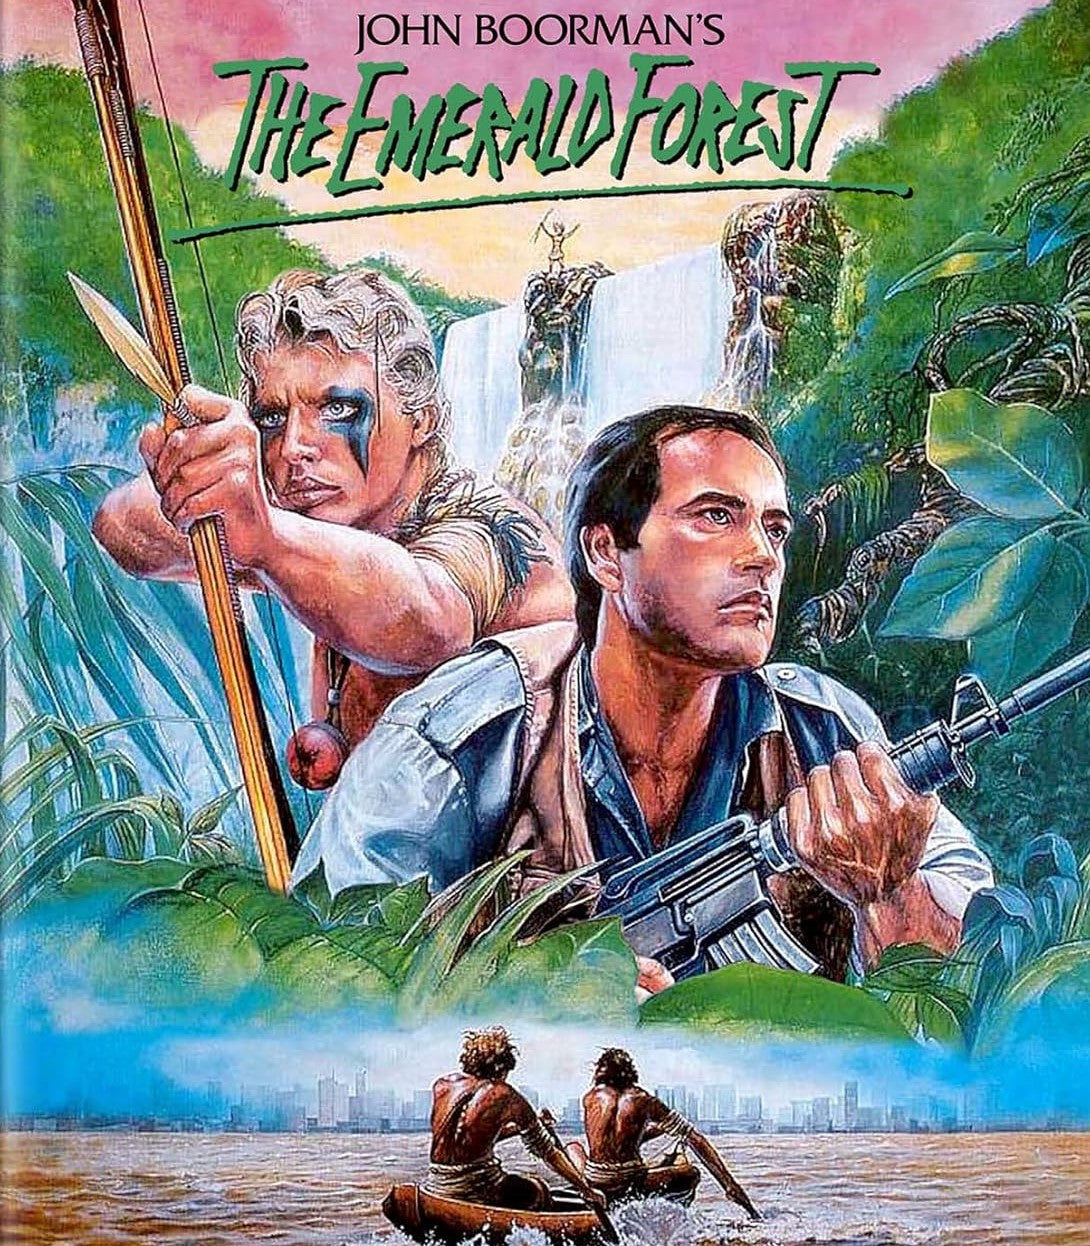 THE EMERALD FOREST BLU-RAY